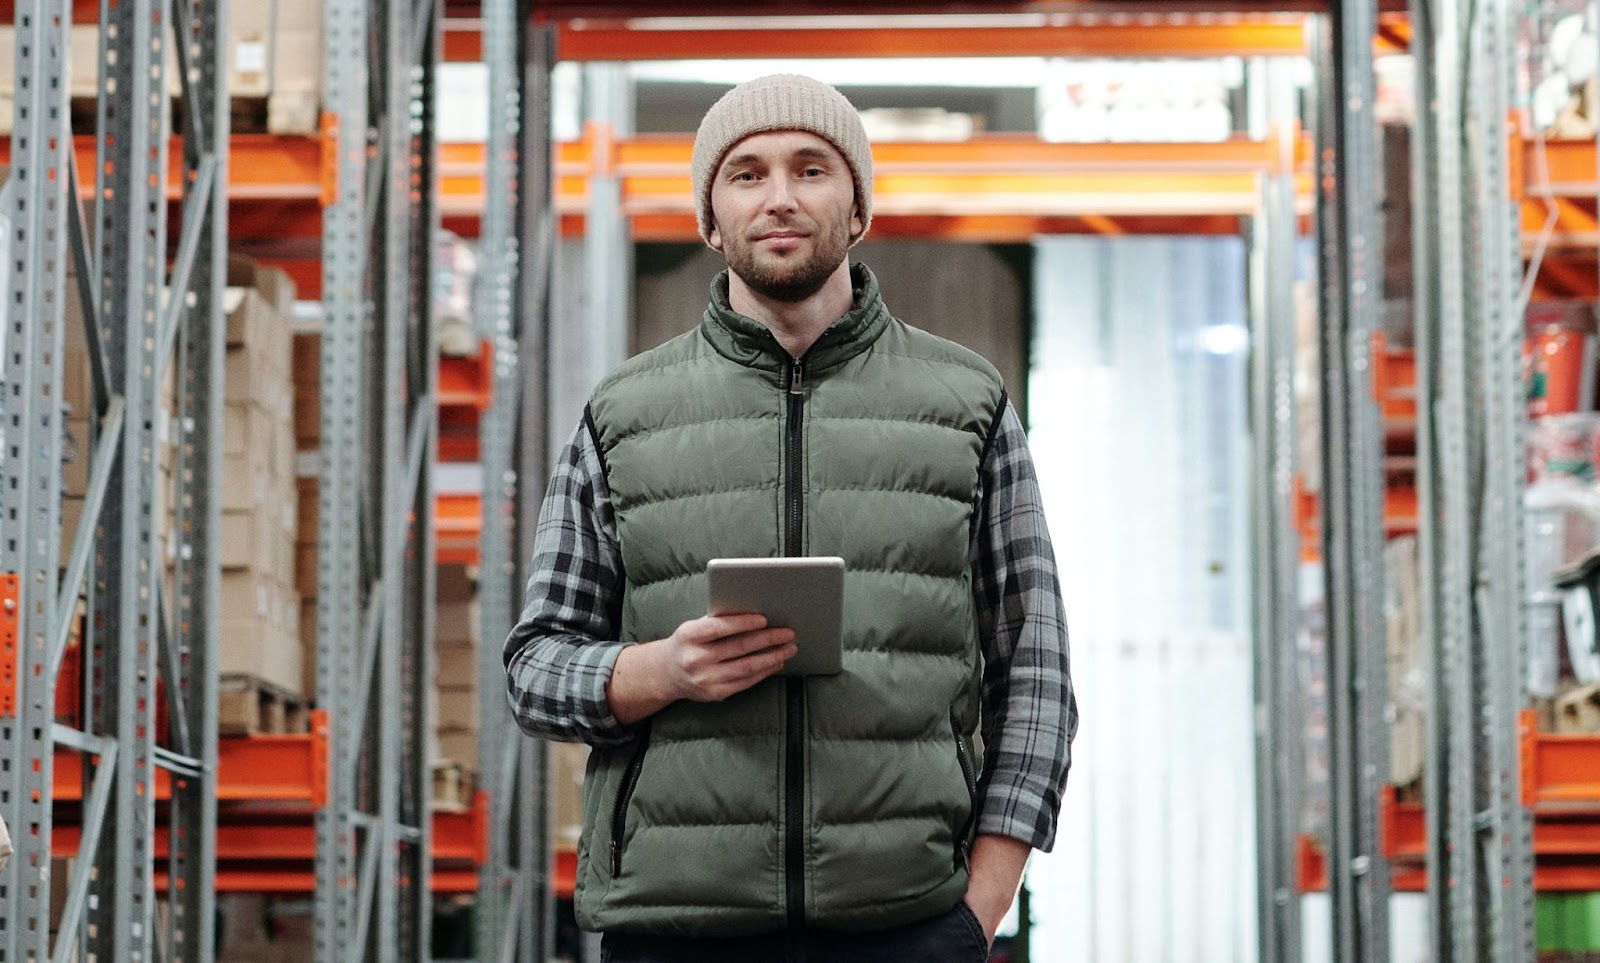 A confident worker, holding a tablet computer and dressed appropriately for a walk-in freezer, stands in their supermarket's commissary warehouse, ready to guide a direct store delivery back to the distribution center.